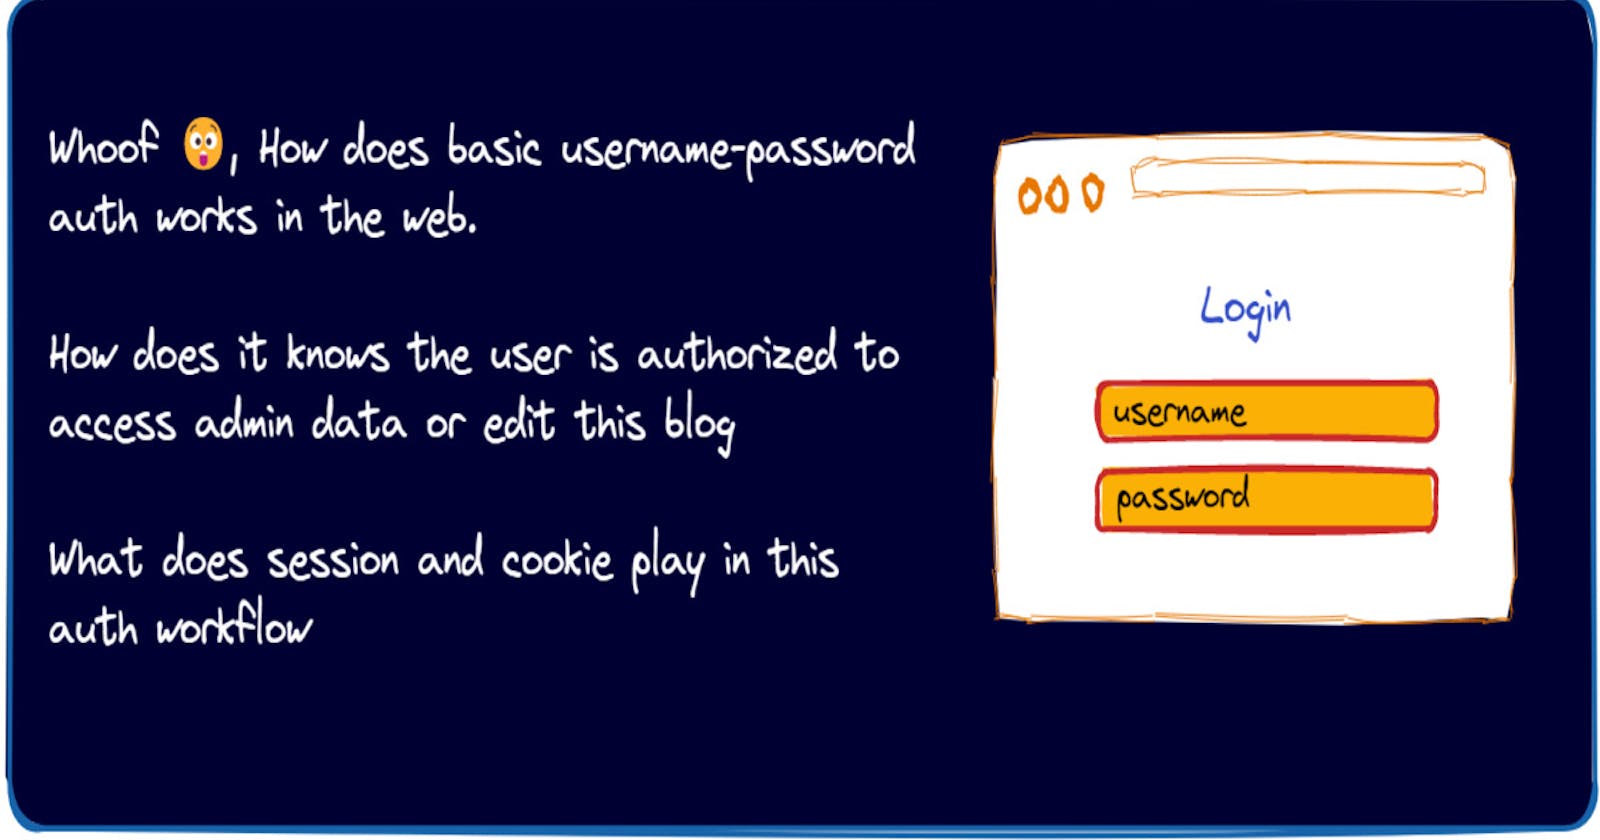 Basic username-password Auth workings with NodeJS